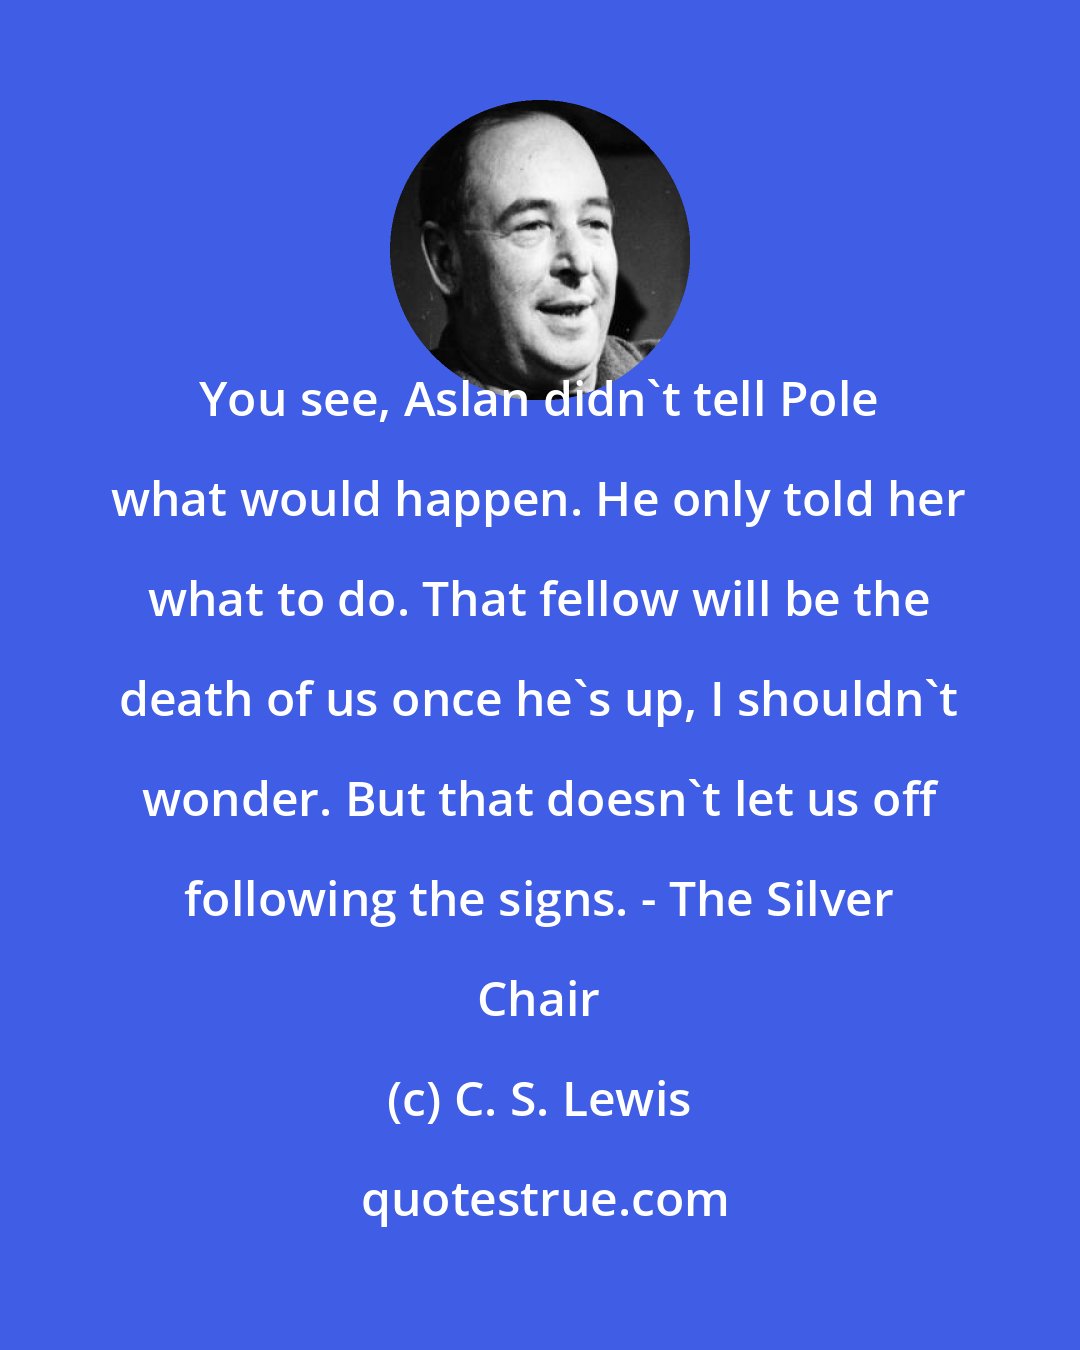 C. S. Lewis: You see, Aslan didn't tell Pole what would happen. He only told her what to do. That fellow will be the death of us once he's up, I shouldn't wonder. But that doesn't let us off following the signs. - The Silver Chair